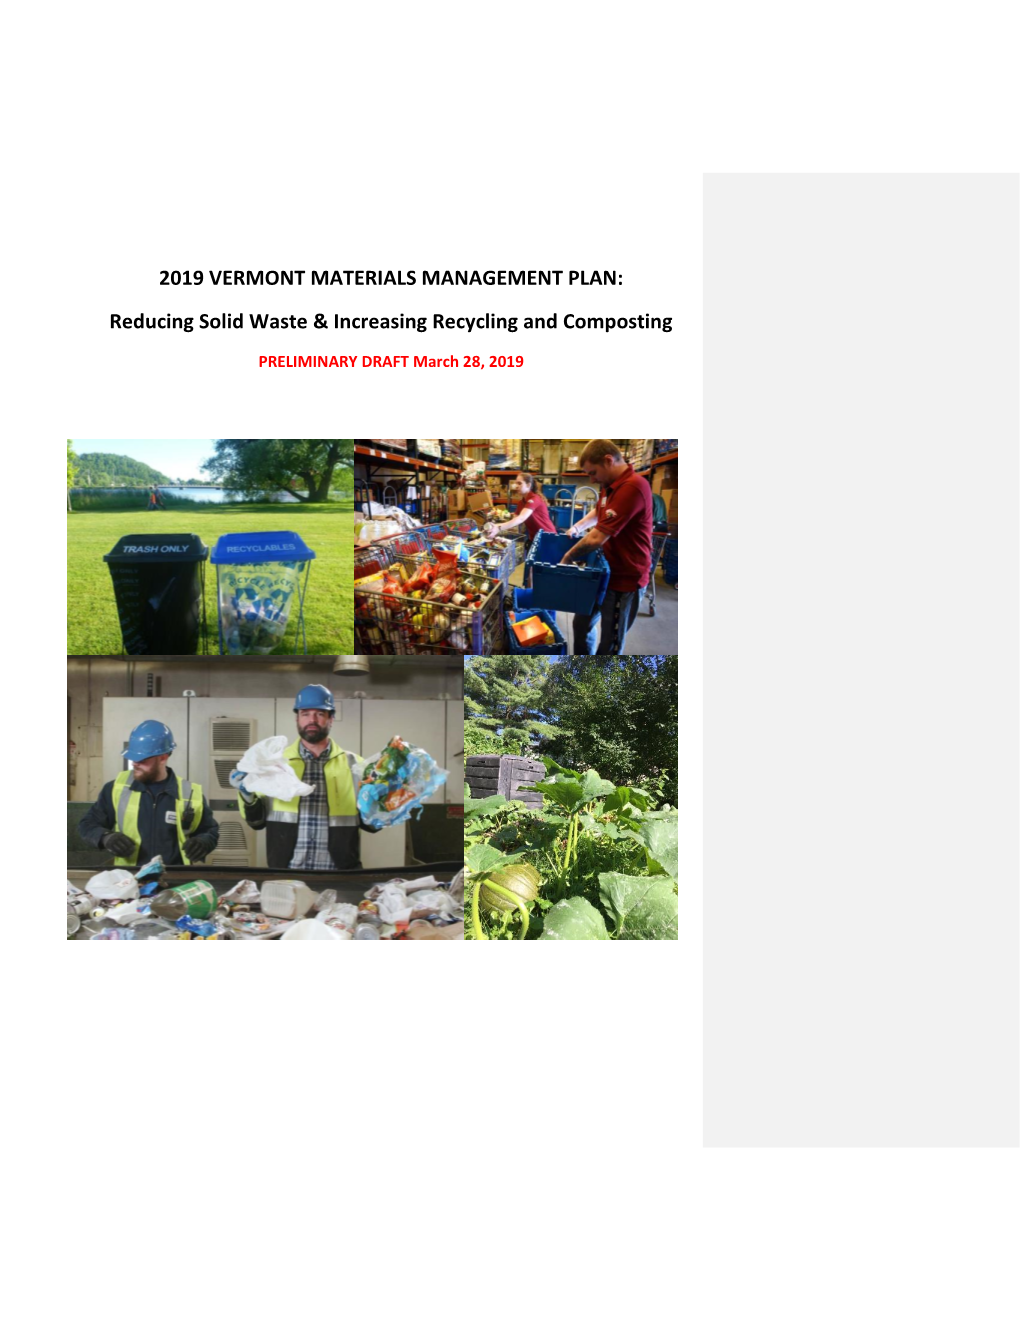 Reducing Solid Waste & Increasing Recycling and Composting